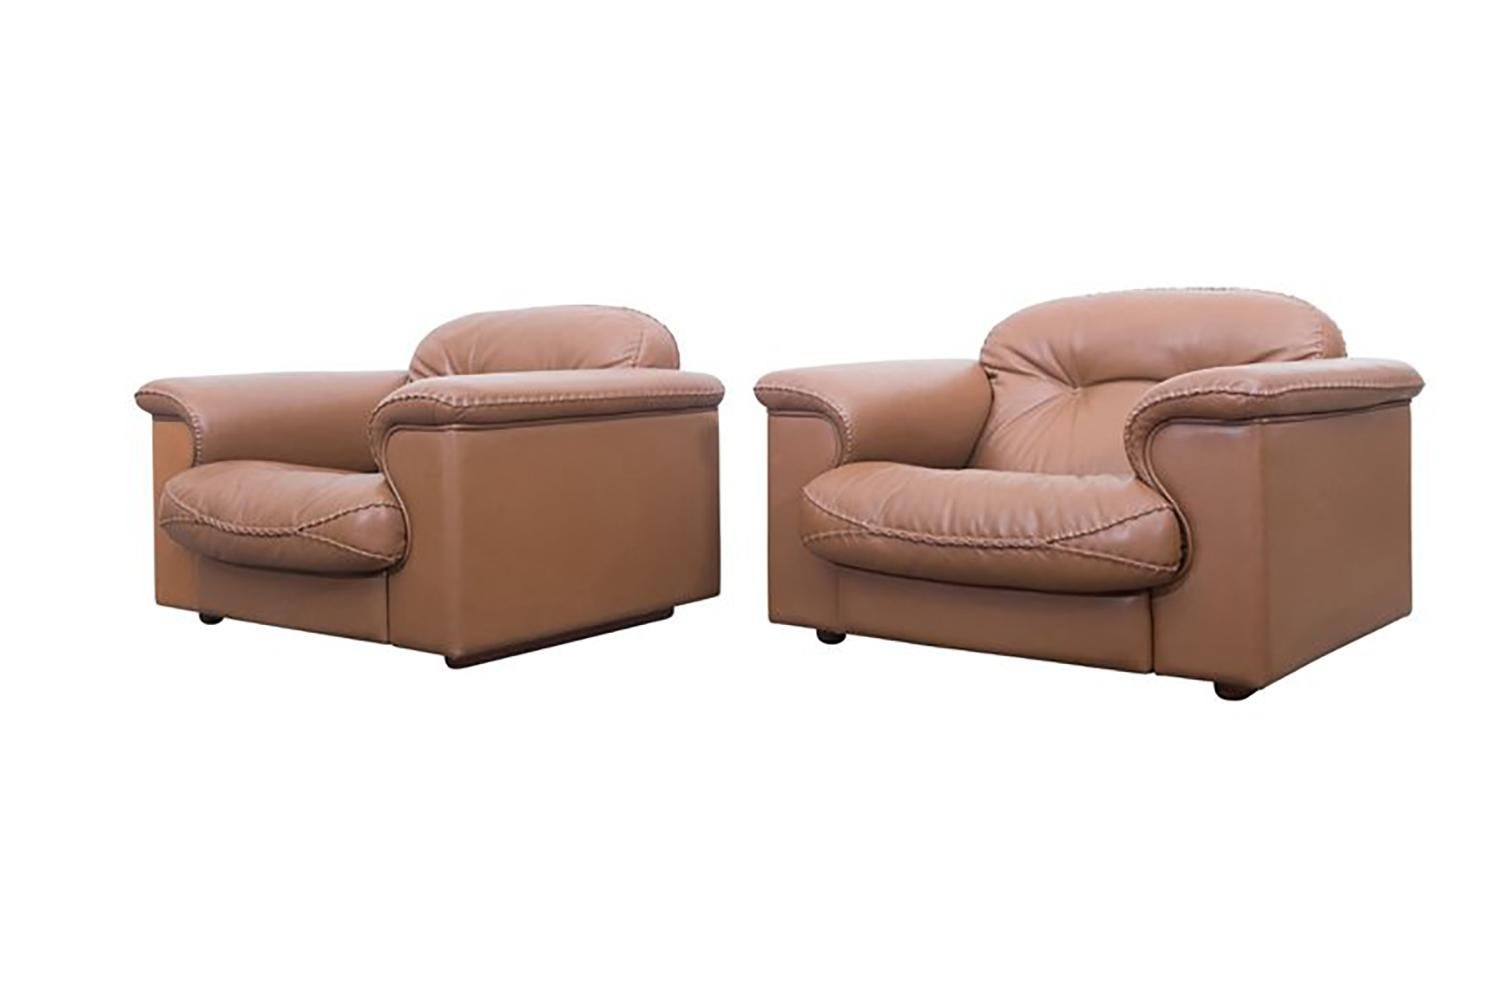 James Bond Cognac leather DS 101 Sofa set by De Sede

A three seat sofa, and a pair of lounge chairs

Adjustable and very comfortable sofas by De Sede, Swiss, 1960s
The chairs are upholstered in very high quality leather and finished with